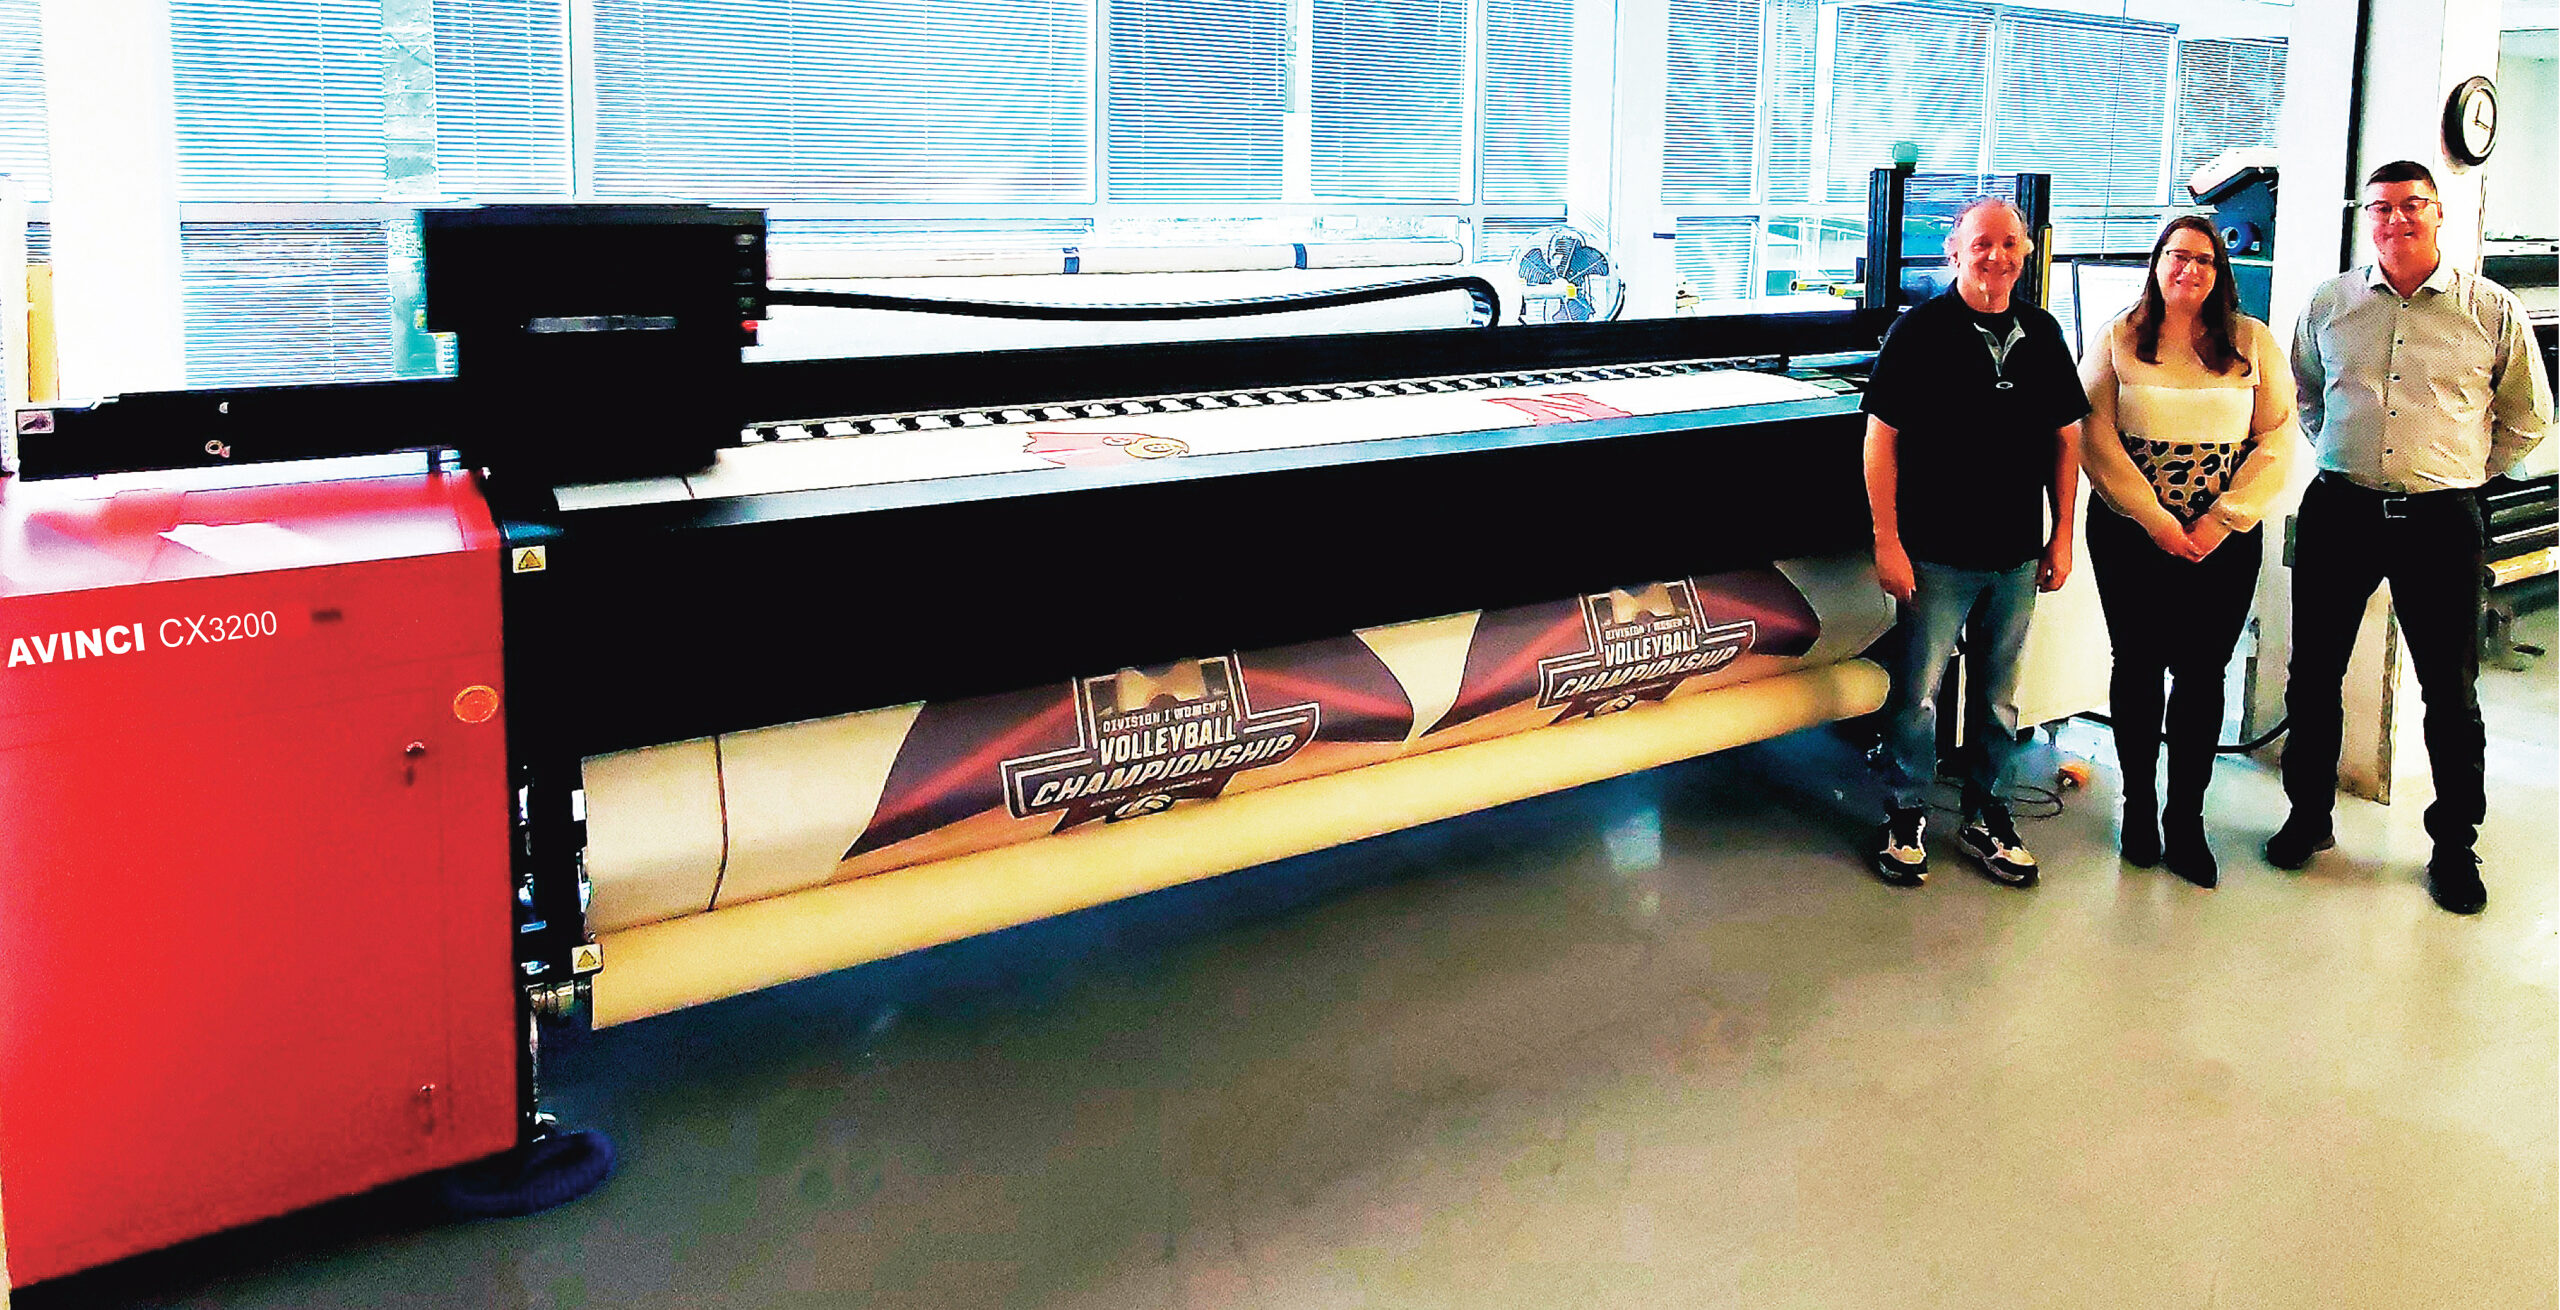 Innovative Displays is first printer in North America to install Agfa’s Avinci CX3200 Dye-Sublimation Printer